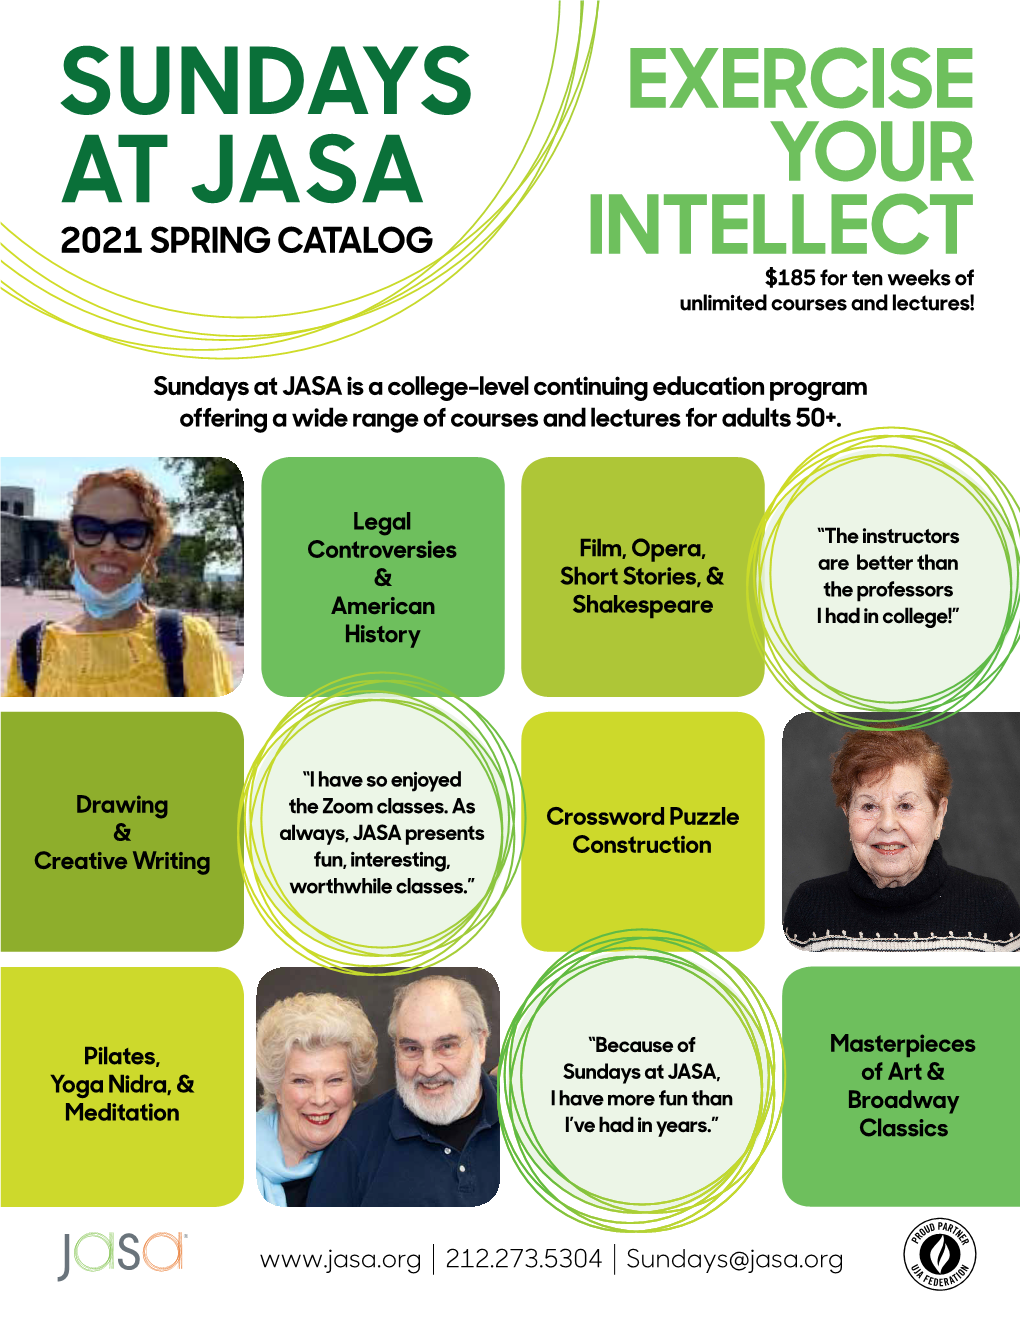 Sundays at JASA Is a College-Level Continuing Education Program Offering a Wide Range of Courses and Lectures for Adults 50+